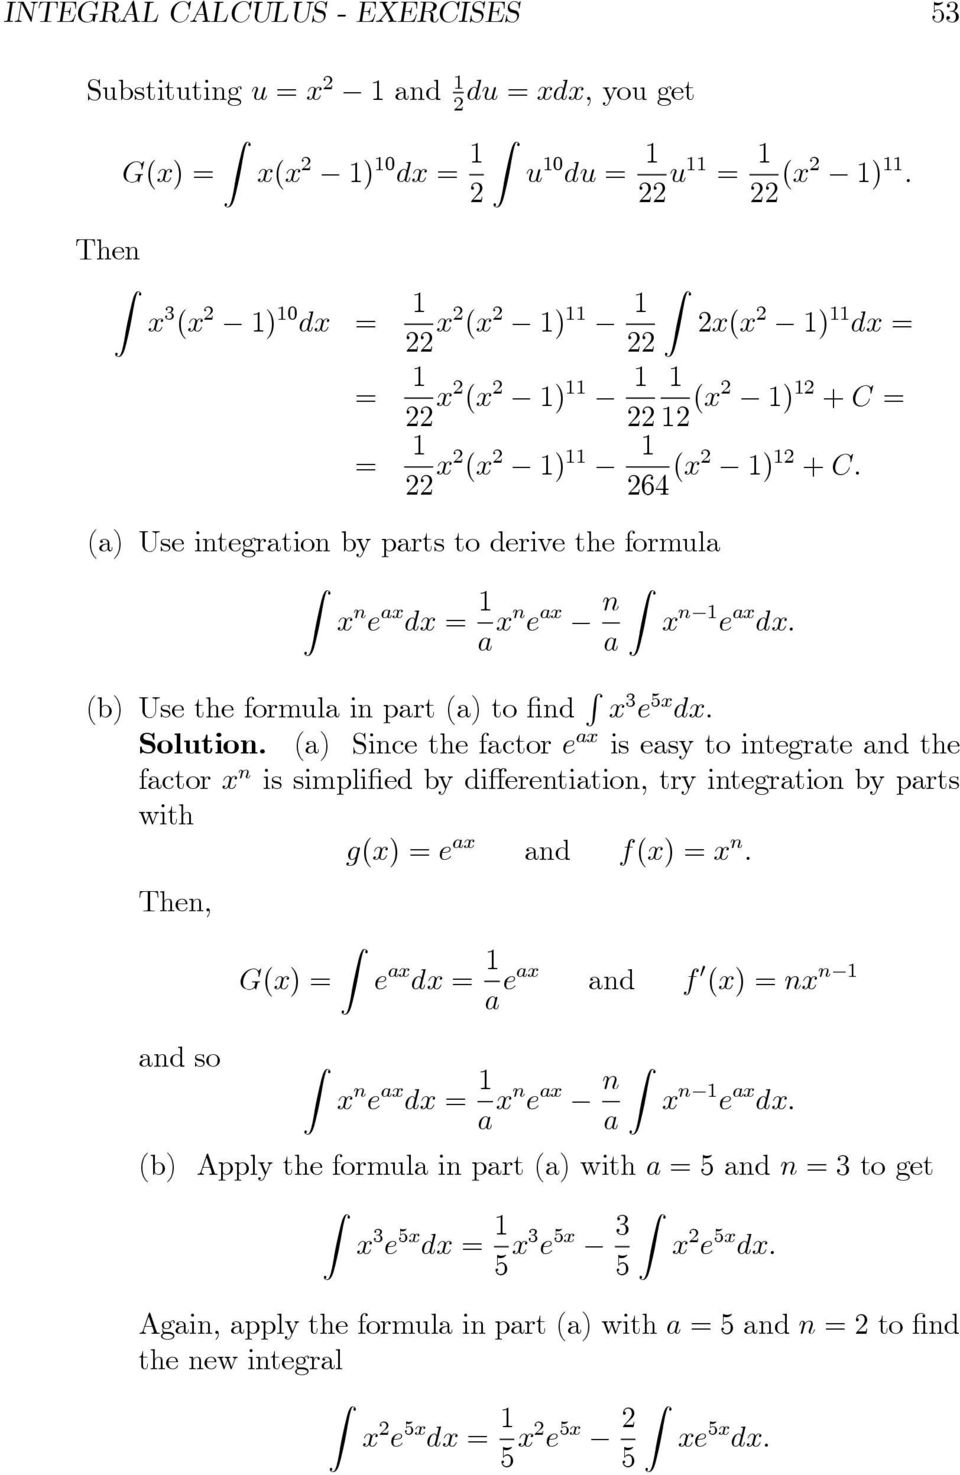 (a) Since the factor e a is easy to integrate and the factor n is simplified by differentiation, try integration by parts with g() =e a and f() = n.